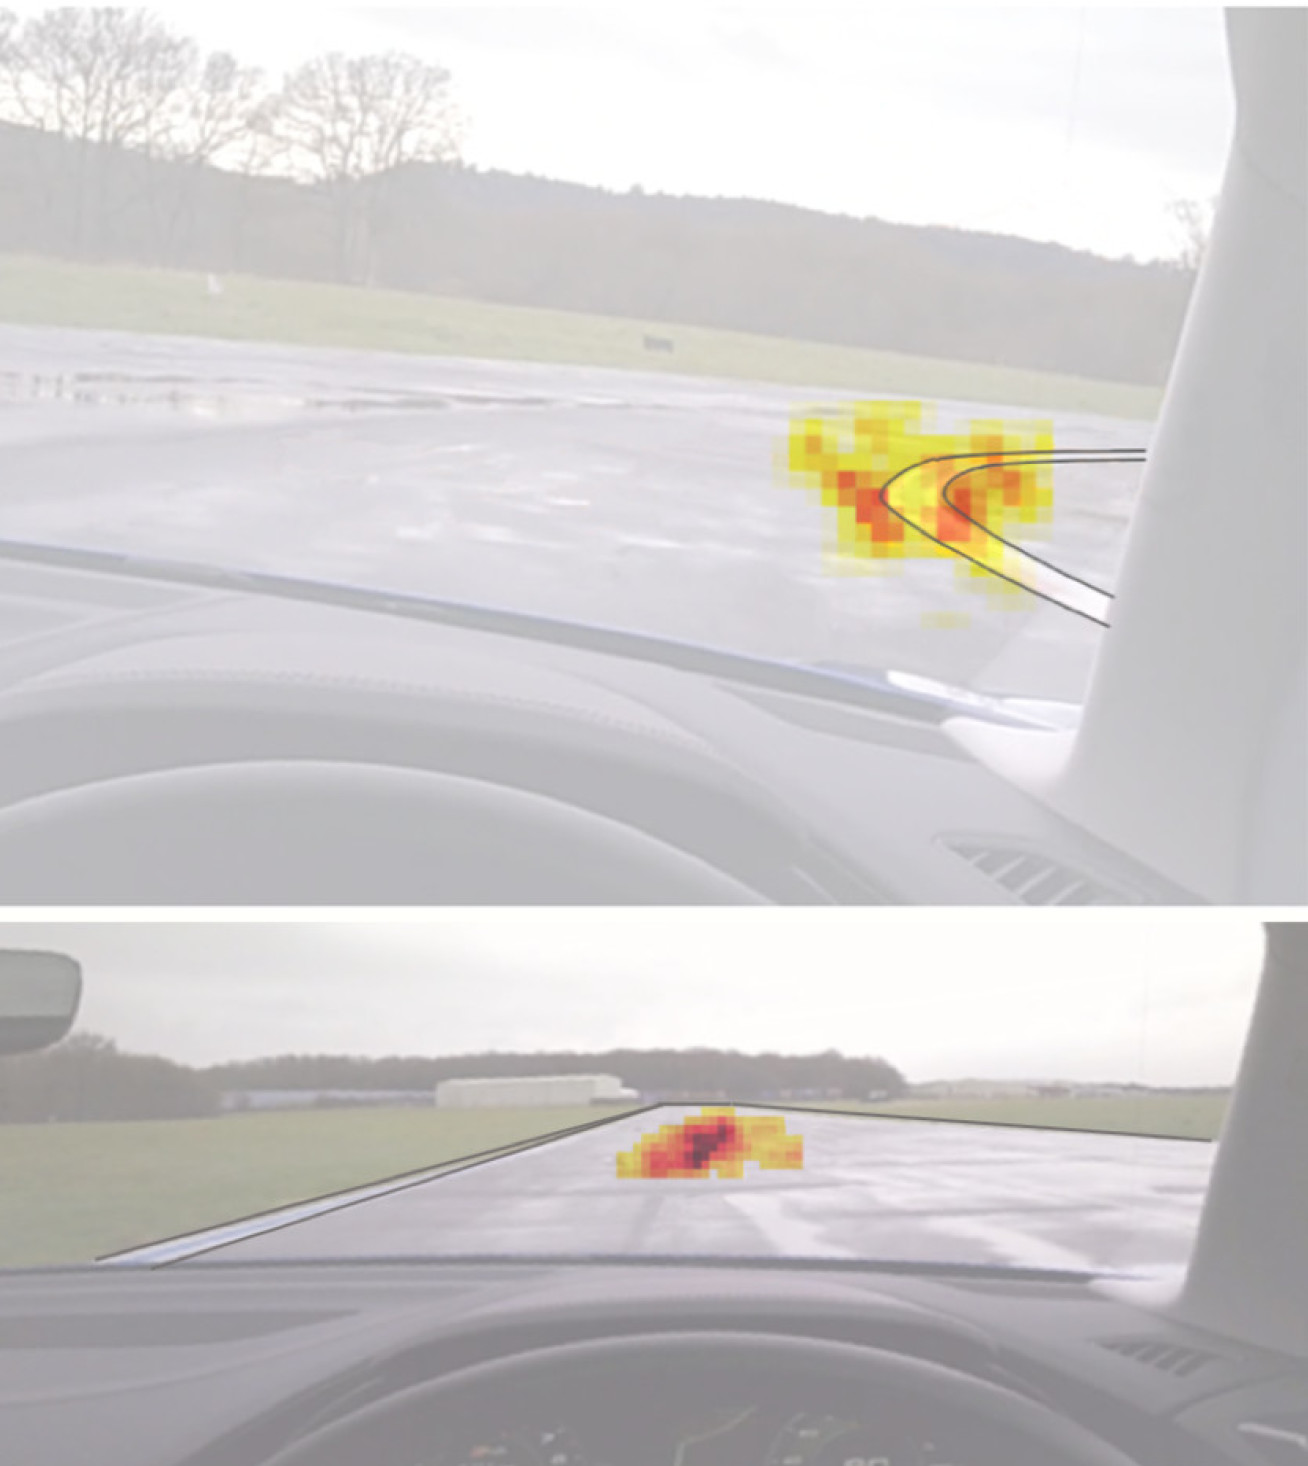 Heat maps of eye gaze using data recorded during the Hammerhead critical curve (top), highlighting the driver’s tendency of tracking the tangent curve; and the straight segments before and after the curve (bottom), where the driver’s gaze focus on the horizon.